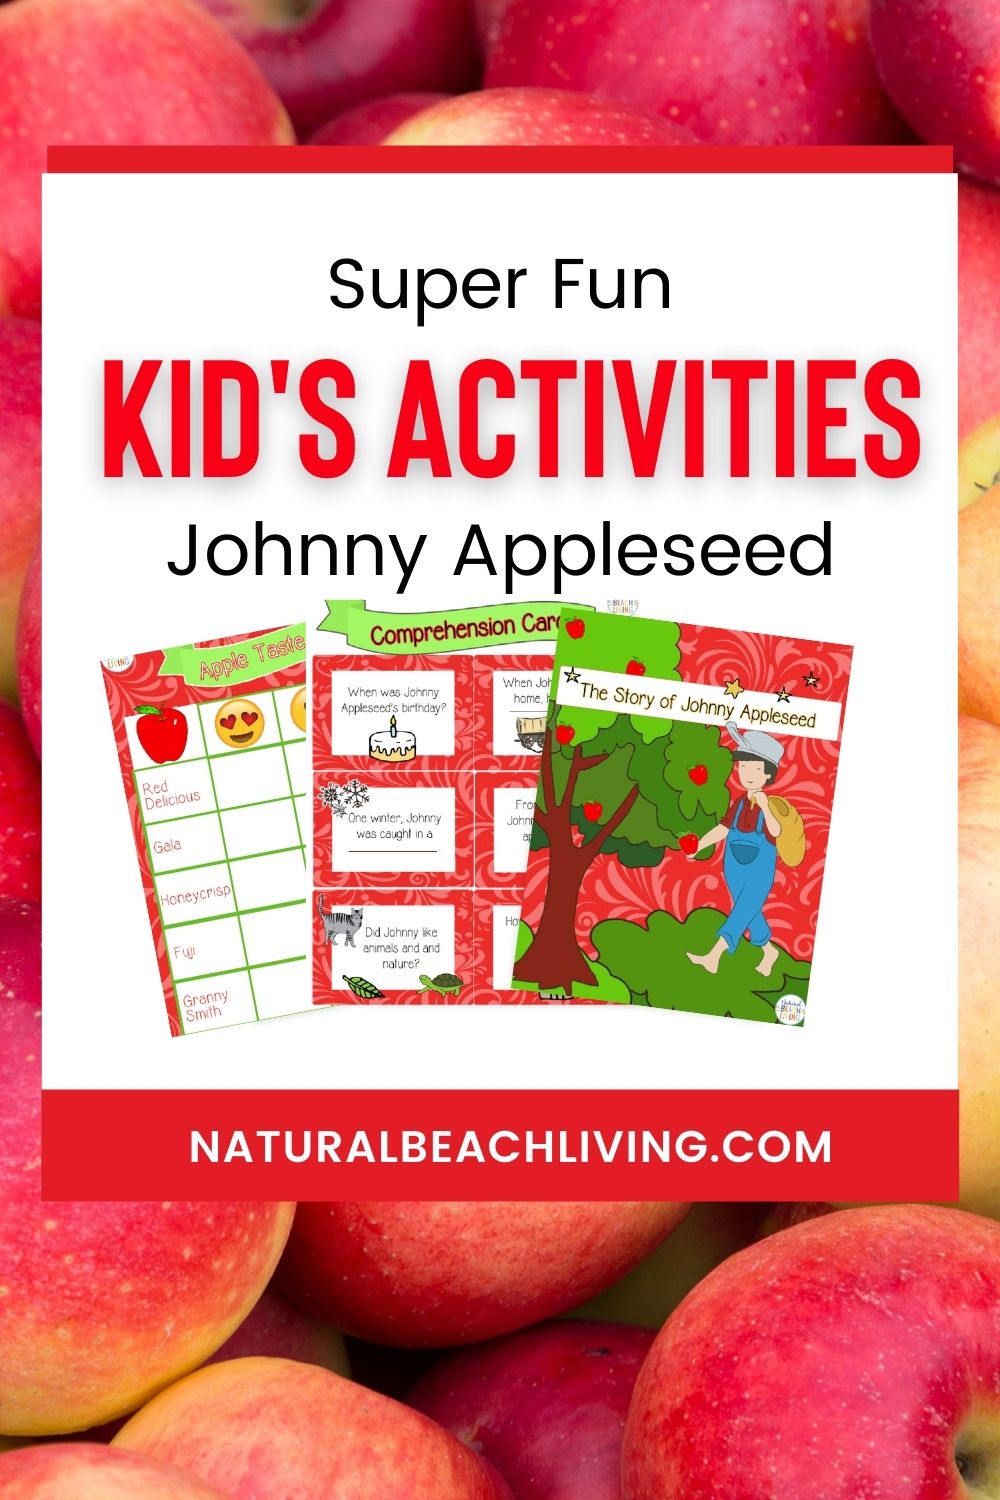 Discover the BEST ways to Celebrate Johnny Appleseed Day with your kids at home and in the classroom, over 40 Johnny Appleseed Day activities, and Johnny Appleseed Day Crafts for preschool, kindergarten, and elementary children